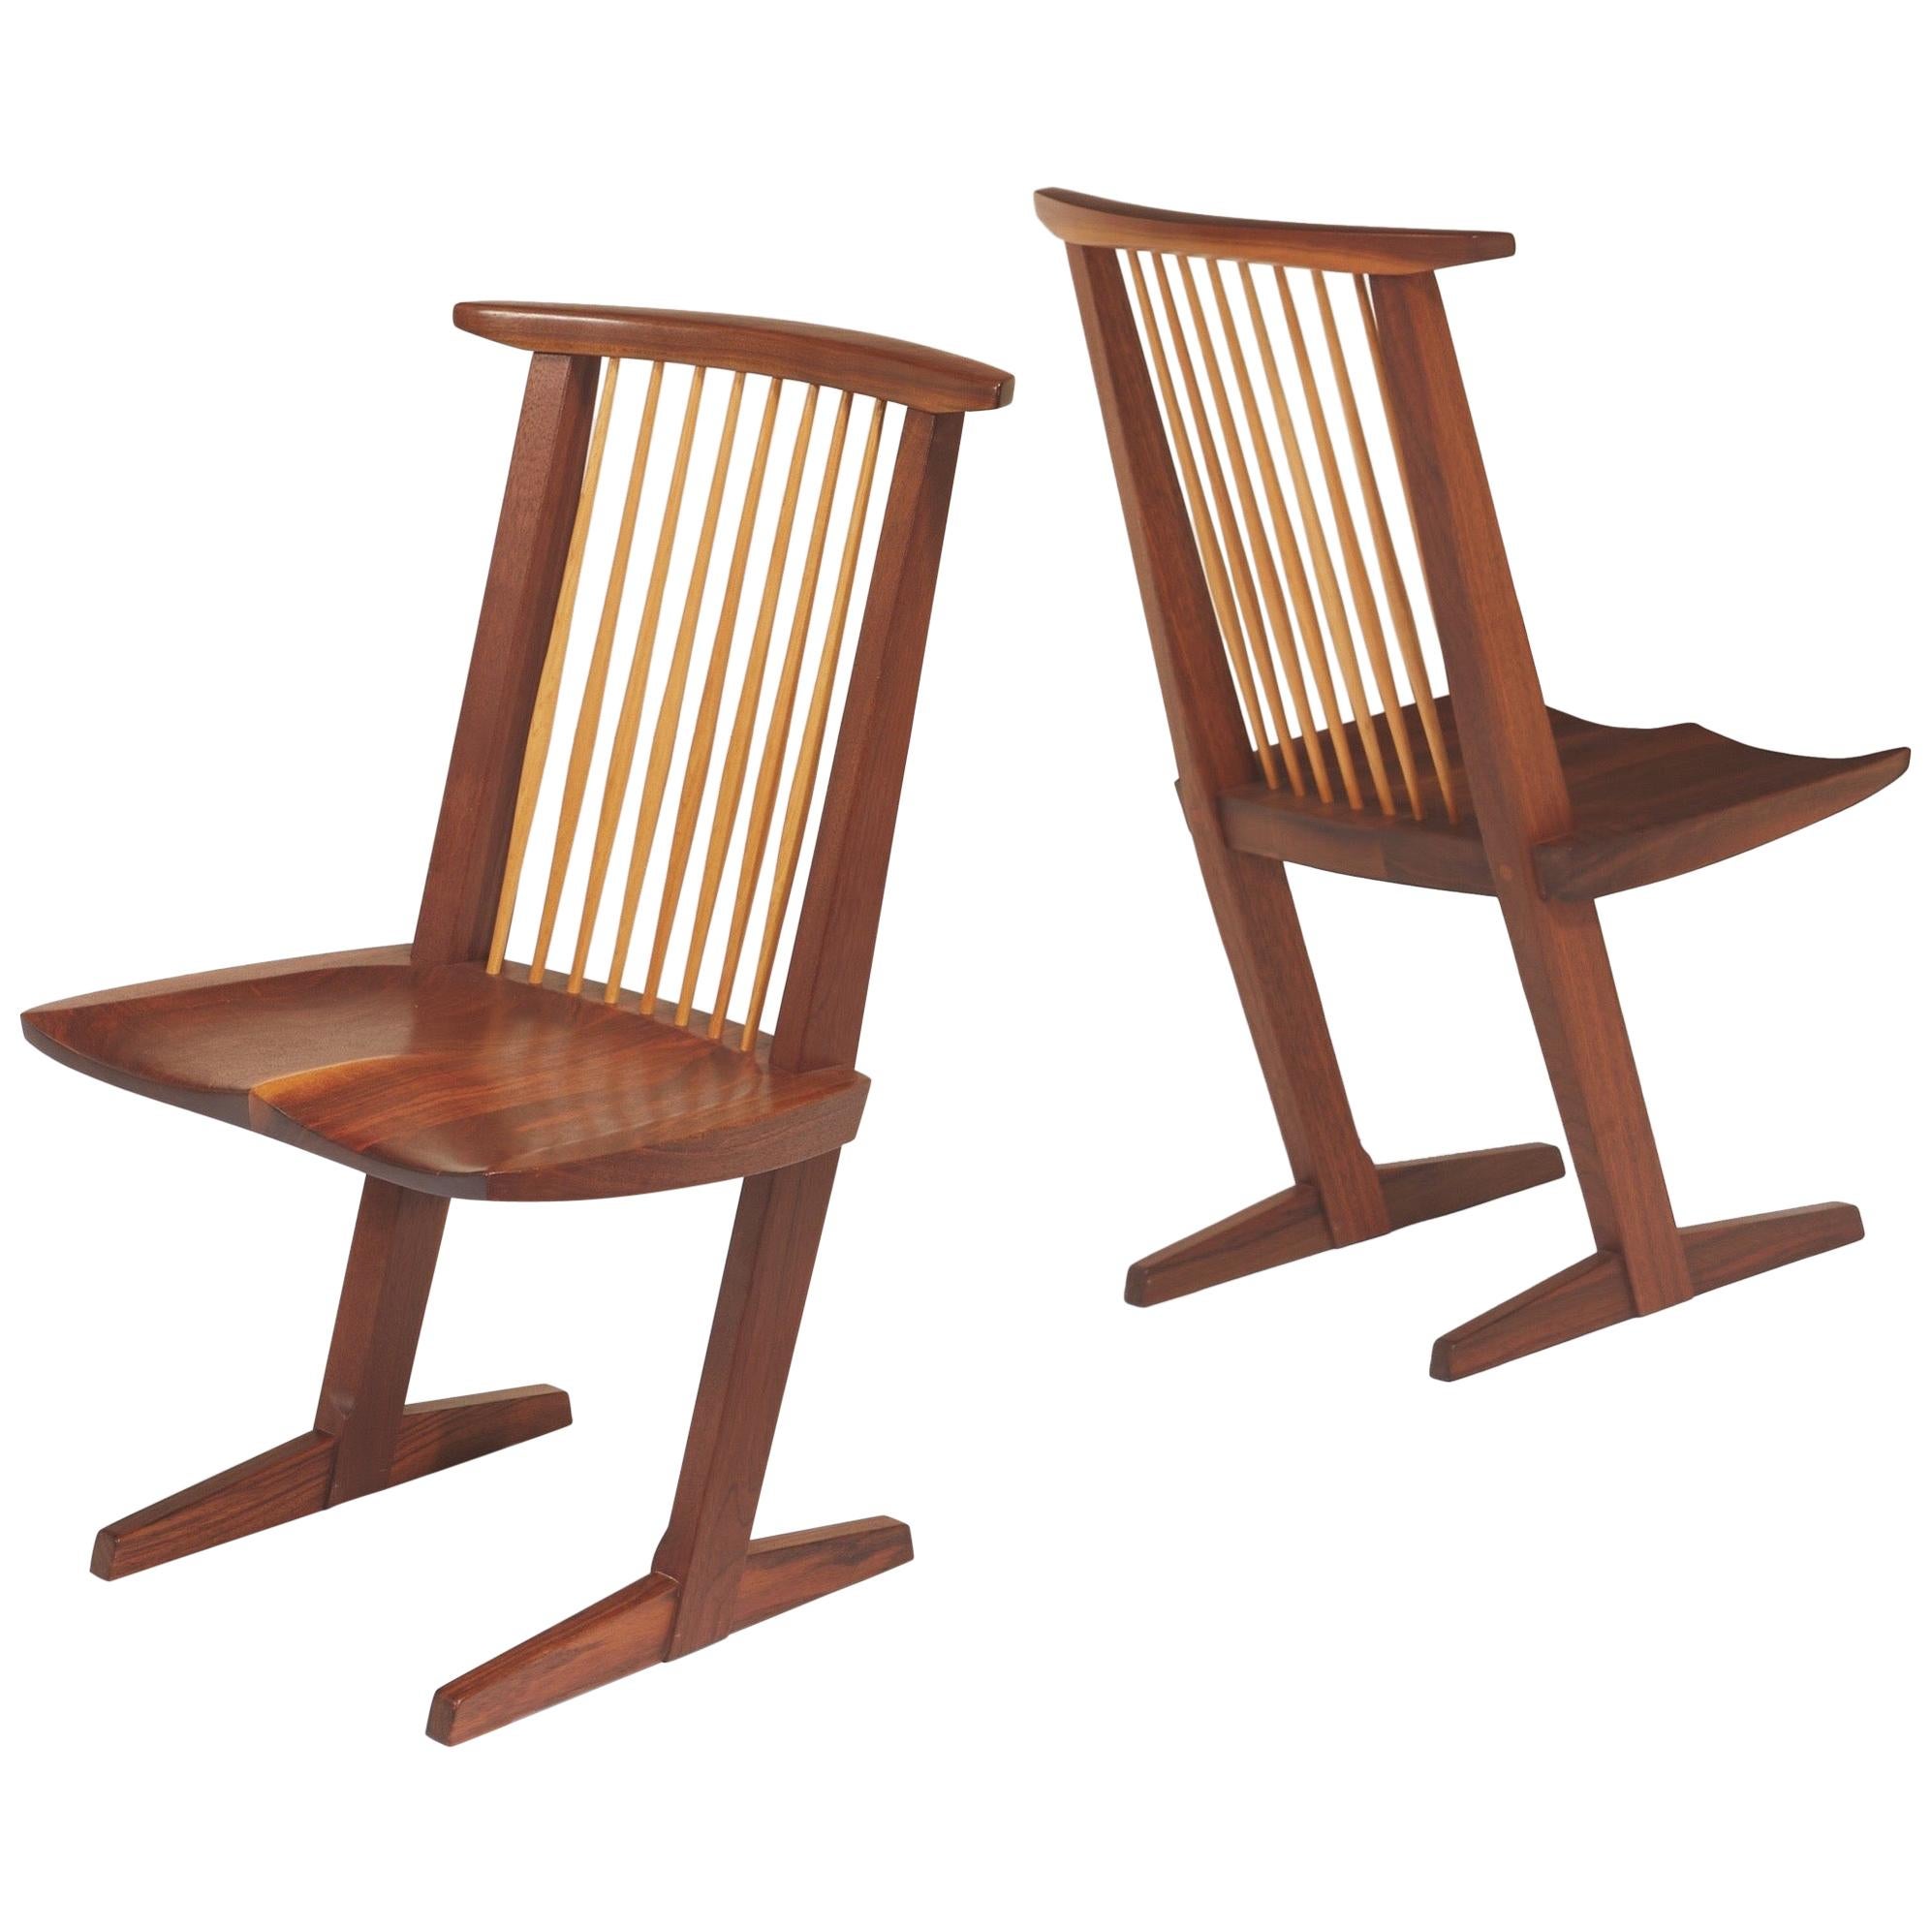 George Nakashima, Rare Sculptural Pair of Conoid Chairs in Walnut, Signed, 1989